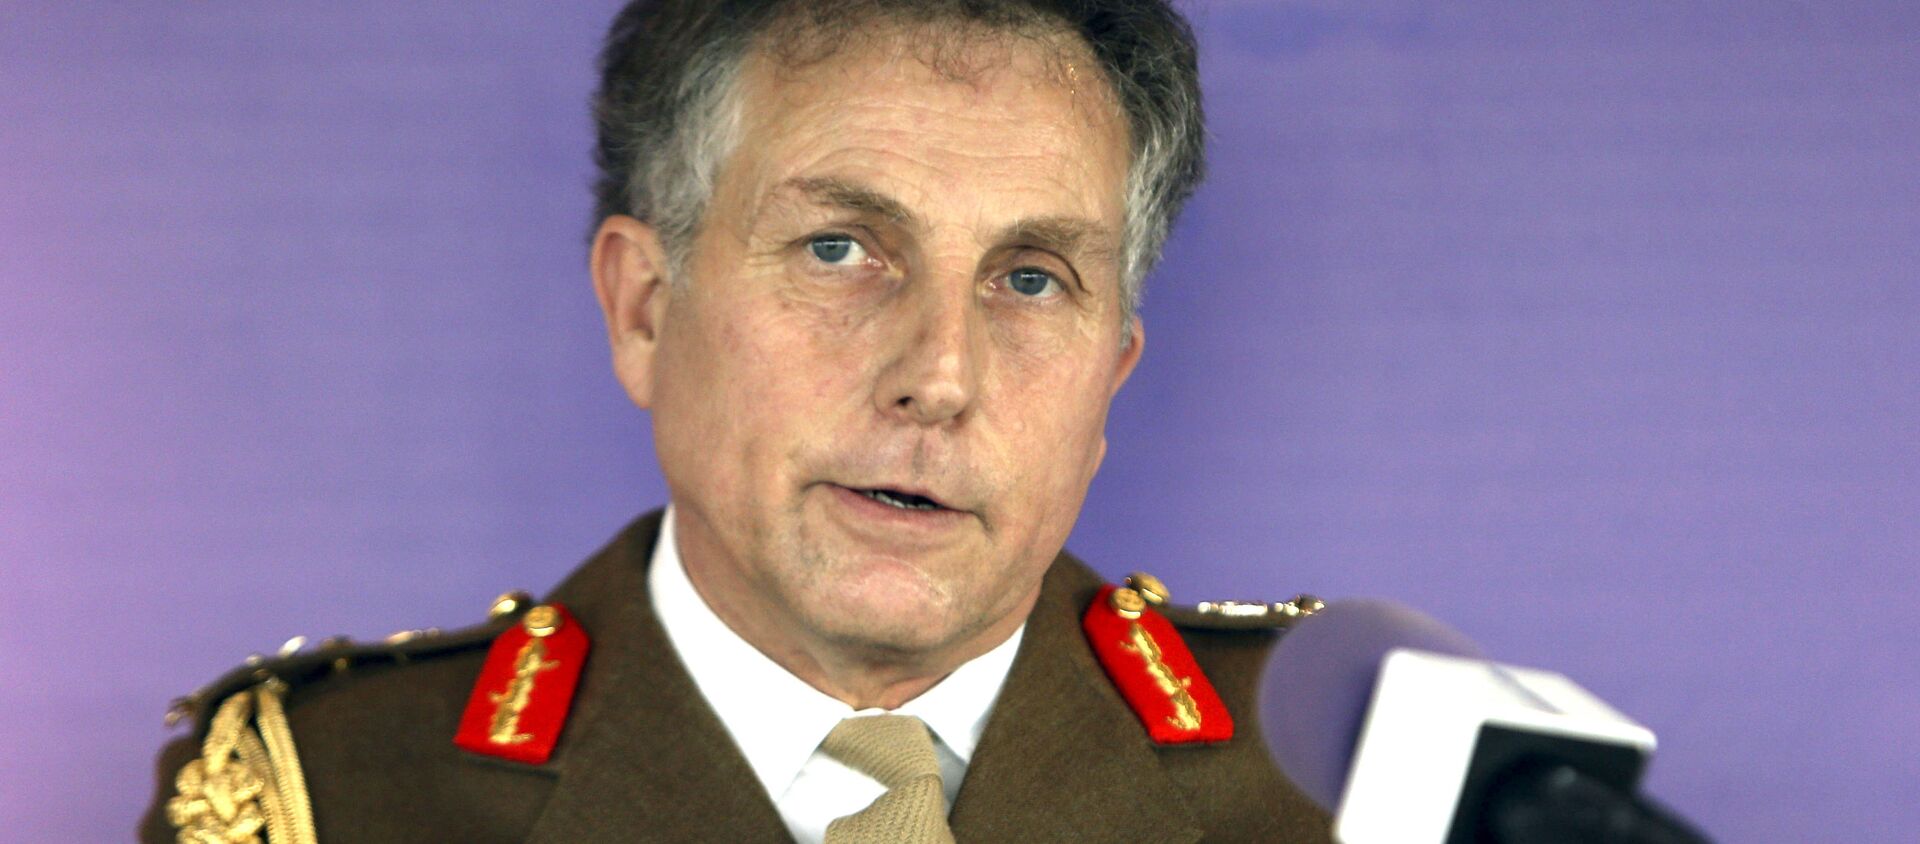 In this Jan. 10, 2017 file photo, British Army chief General Nick Carter makes a speech during the launch of the army's leadership doctrine at the BT Tower in central London - Sputnik International, 1920, 25.06.2021